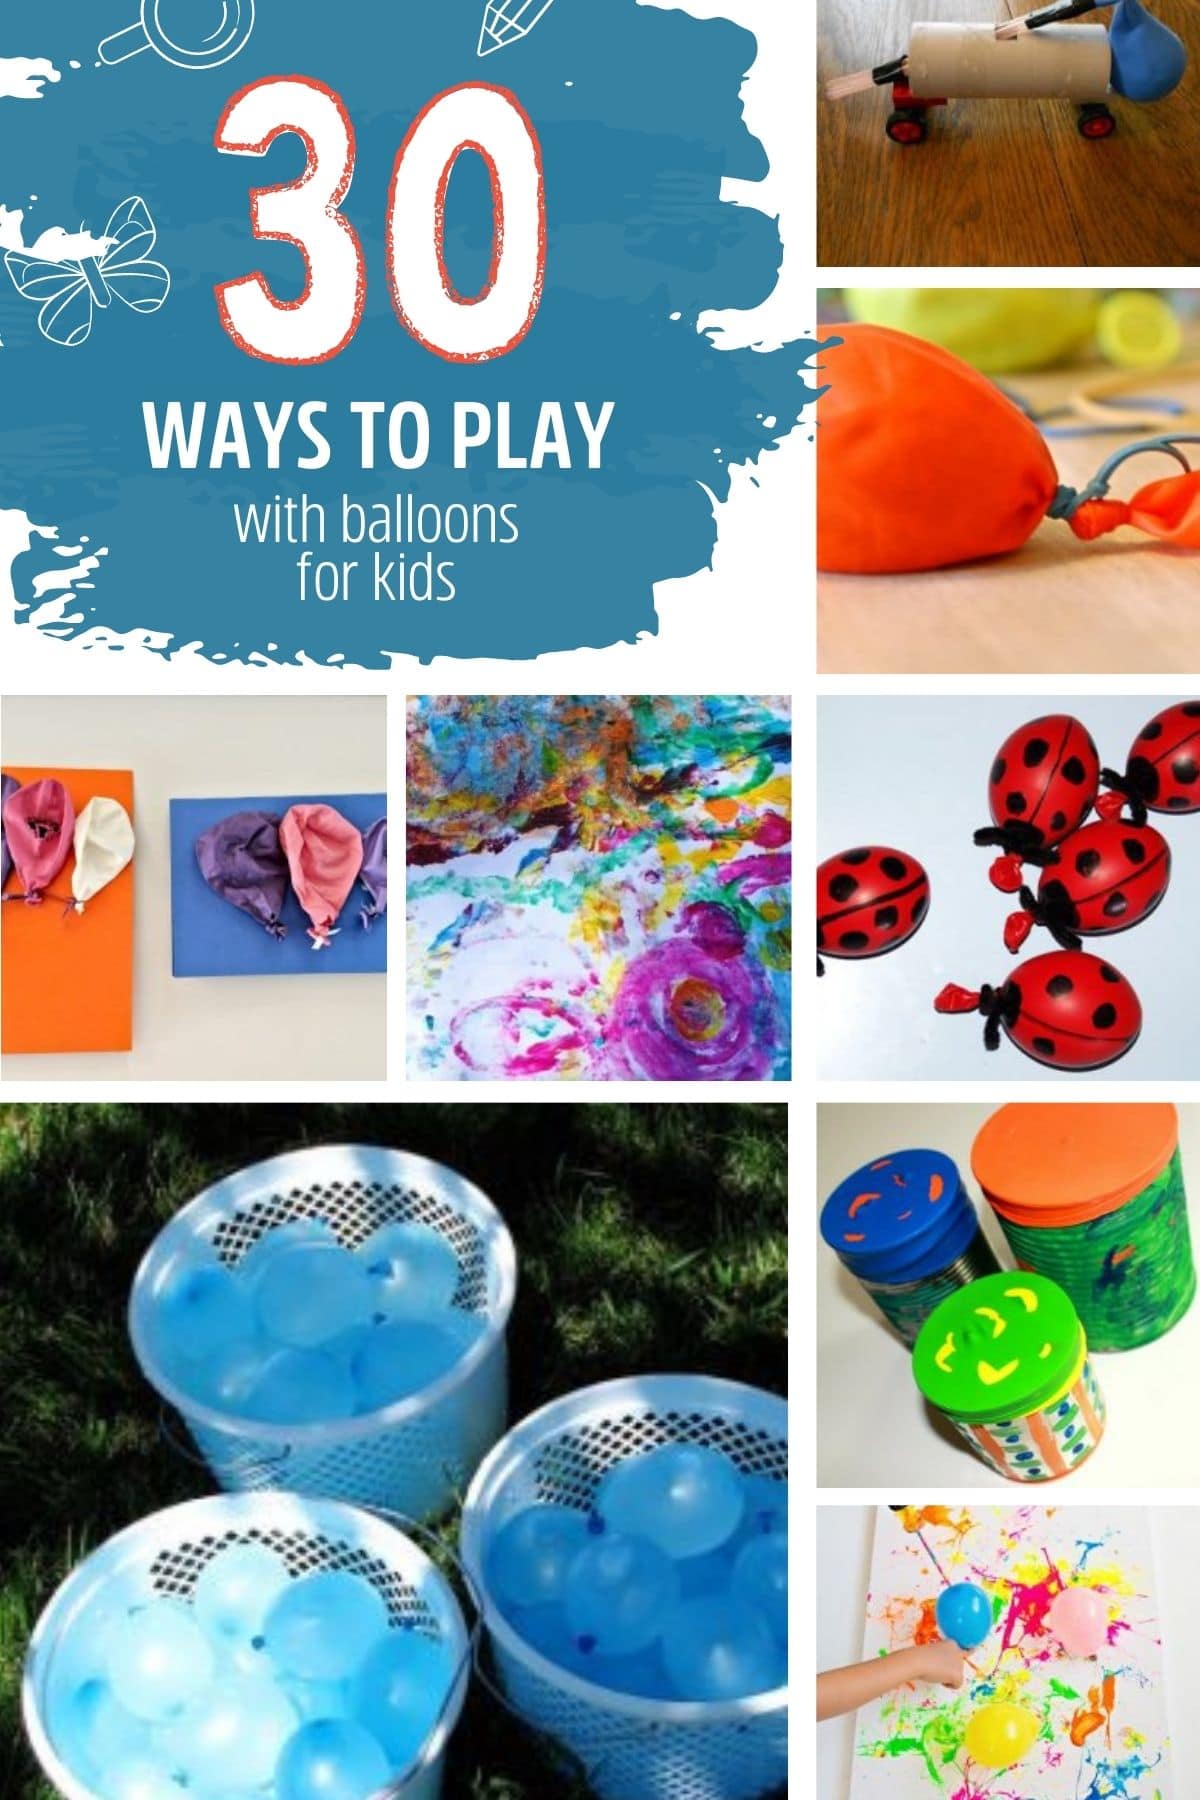 Try these 30+ creative ways to play with balloons through activities, art, experiments, and crafts! Balloons are fun all year round!